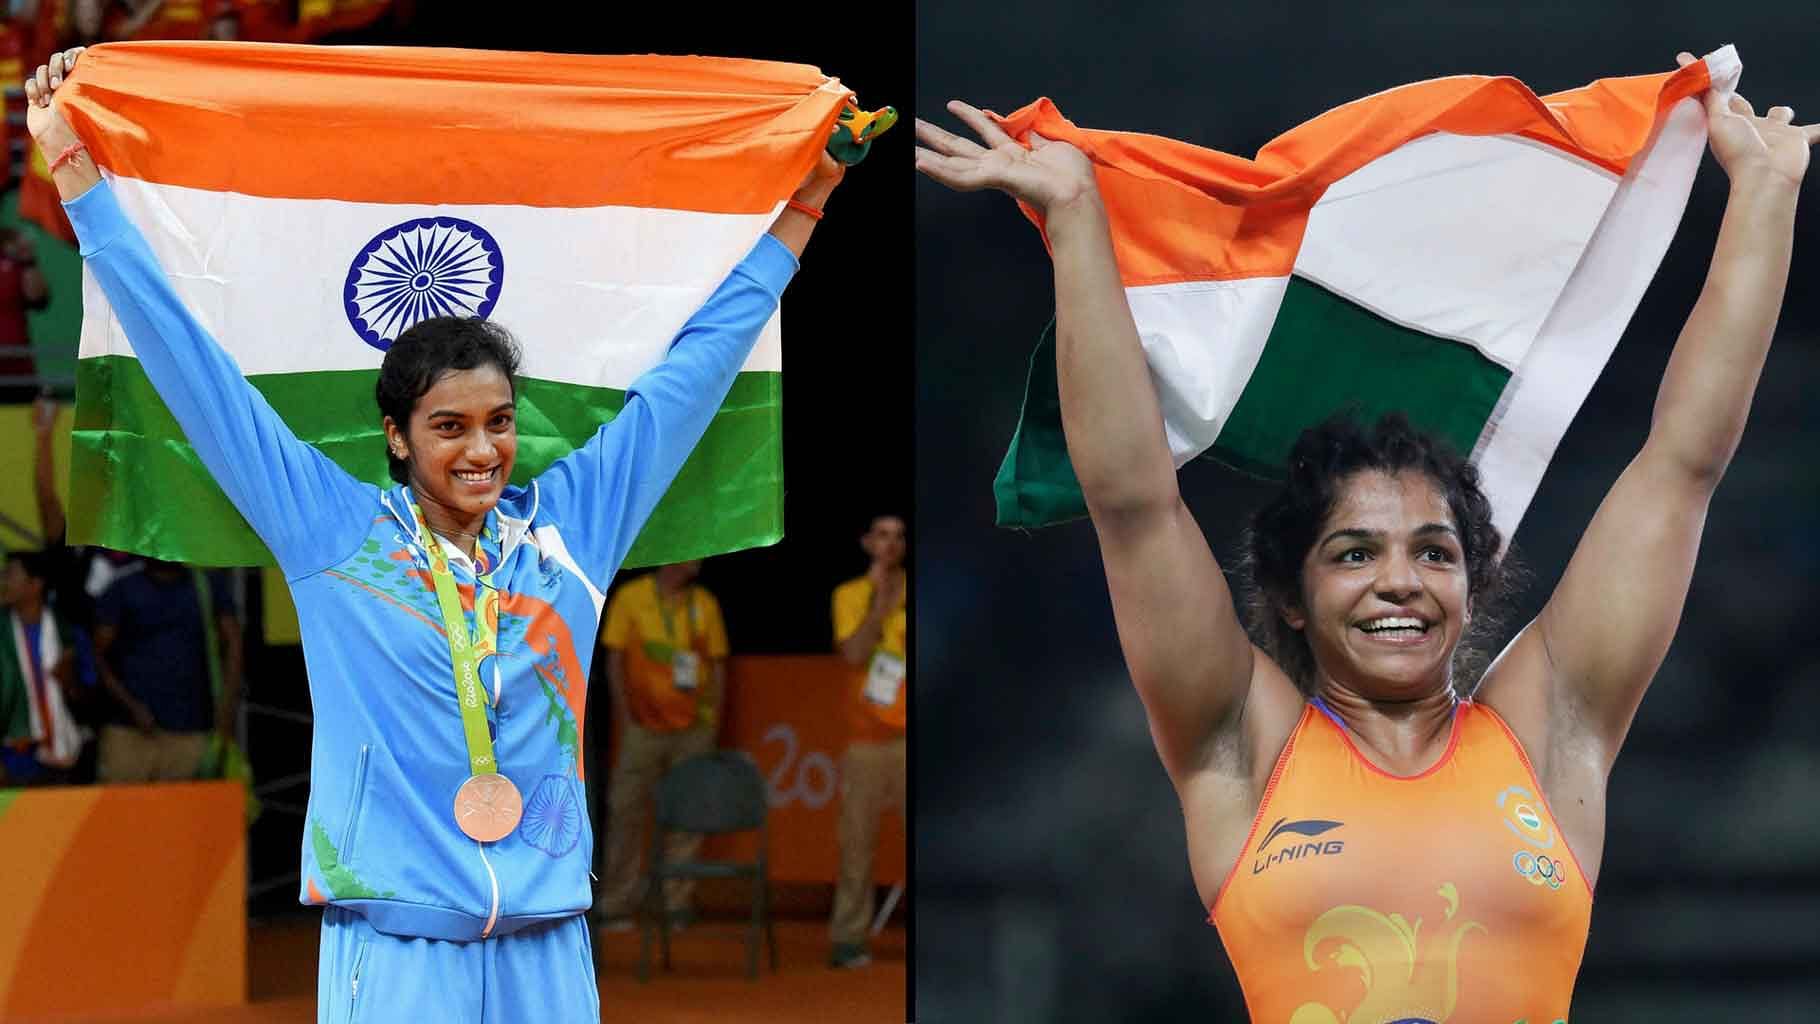 PV Sindhu and Sakshi Malik were the 2 medallists for India at the Rio Olympics. (Photo: AP)